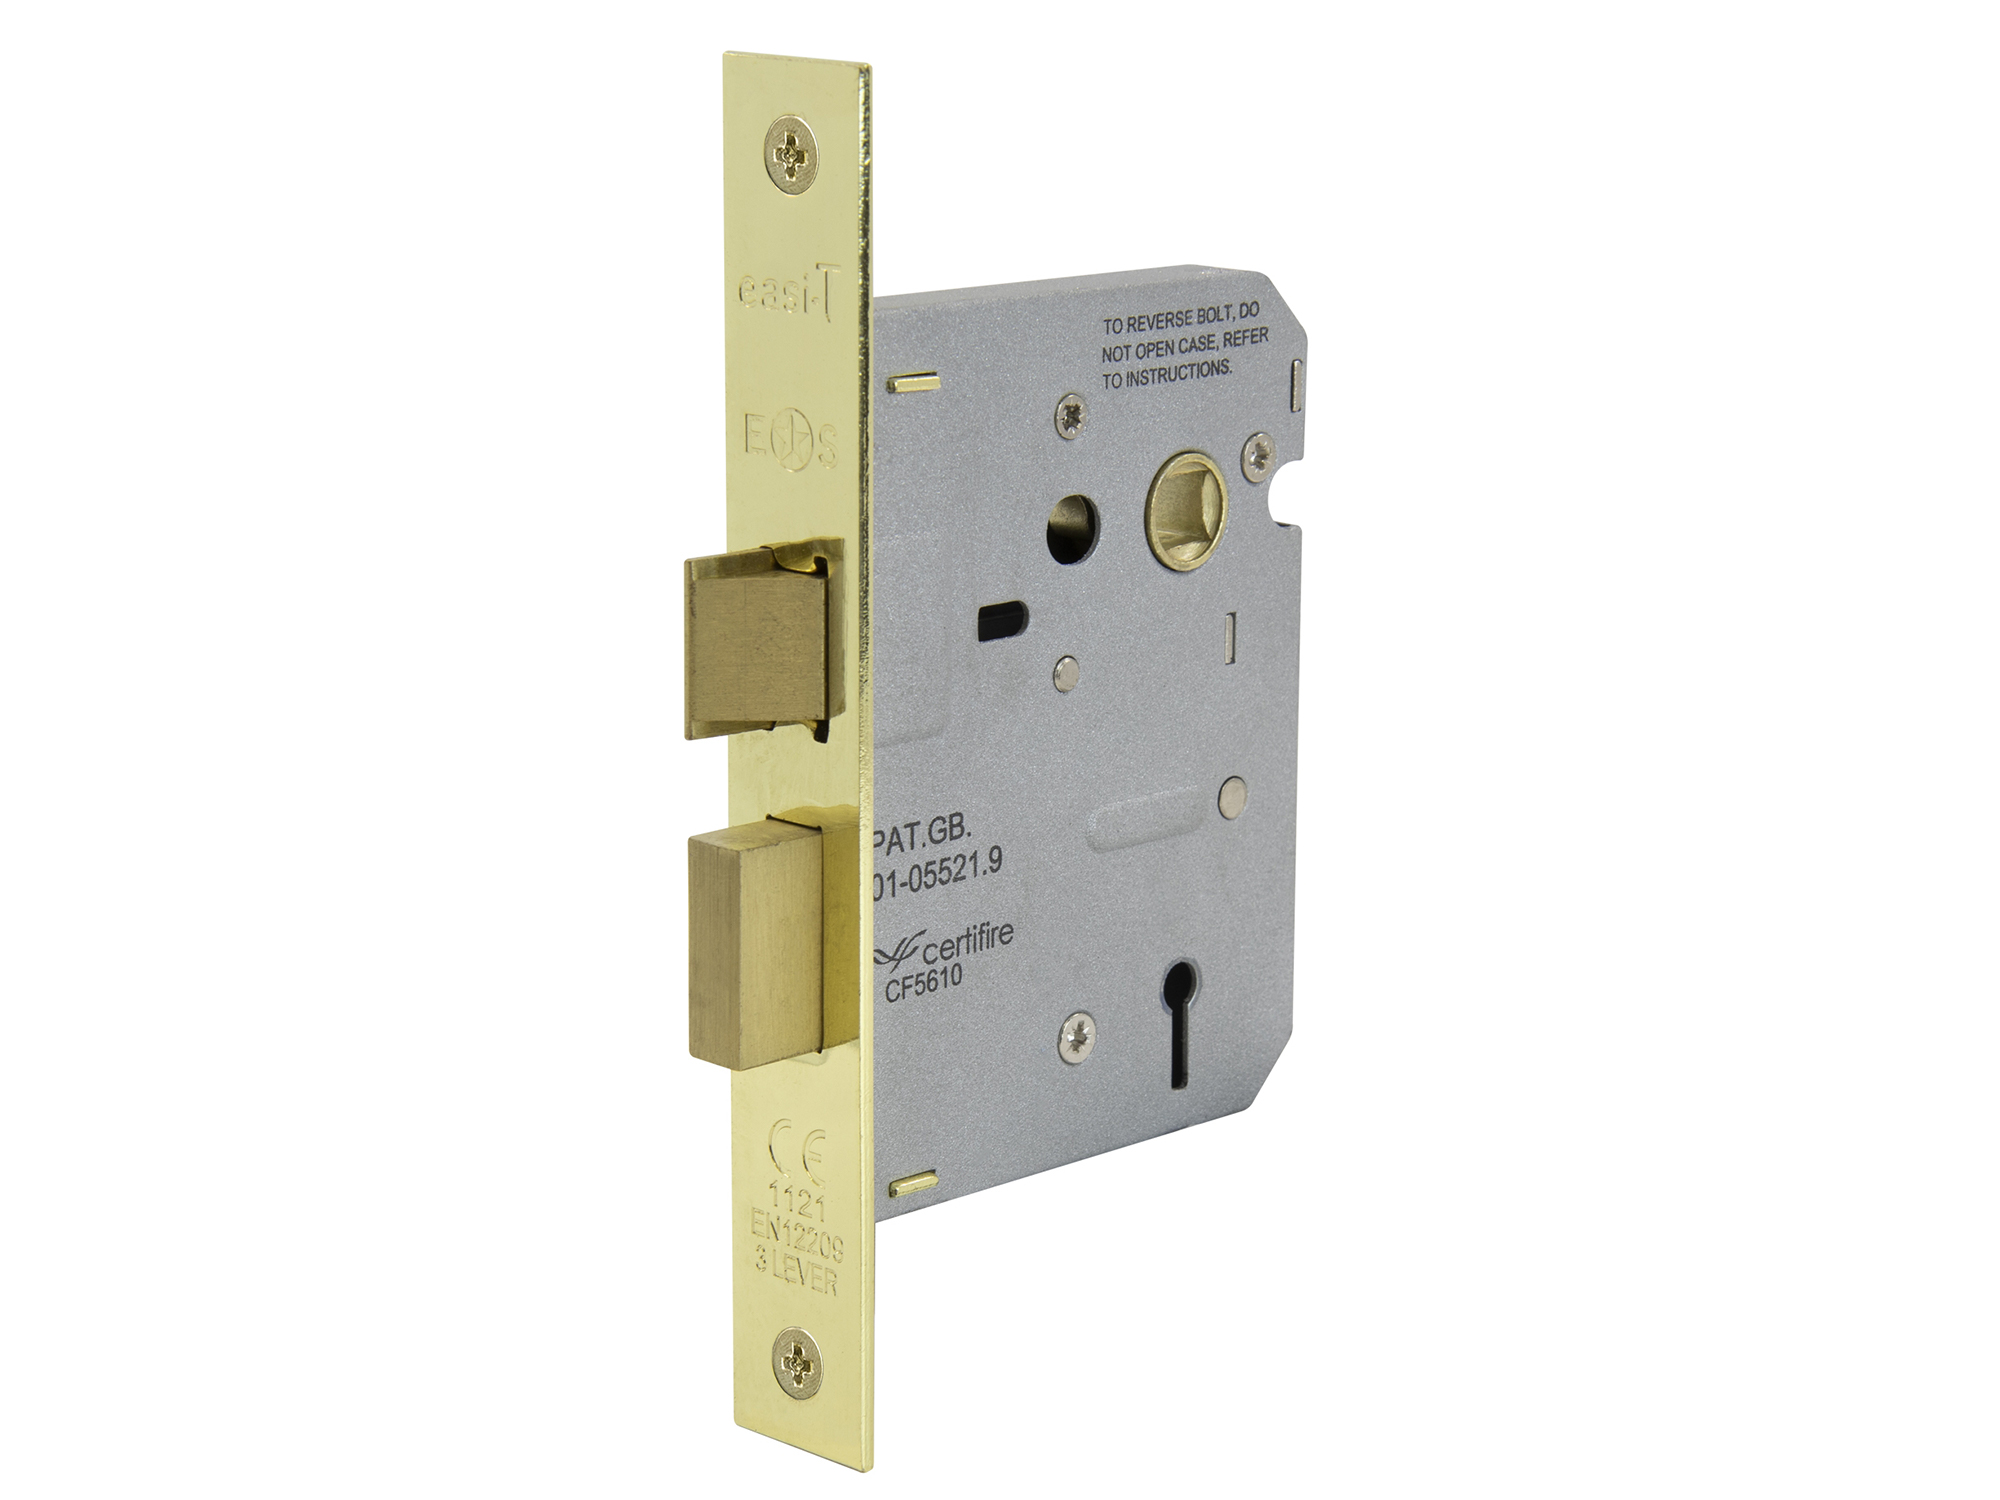 Mortice Door Latch for Internal Doors with Polished Finish - 57mm